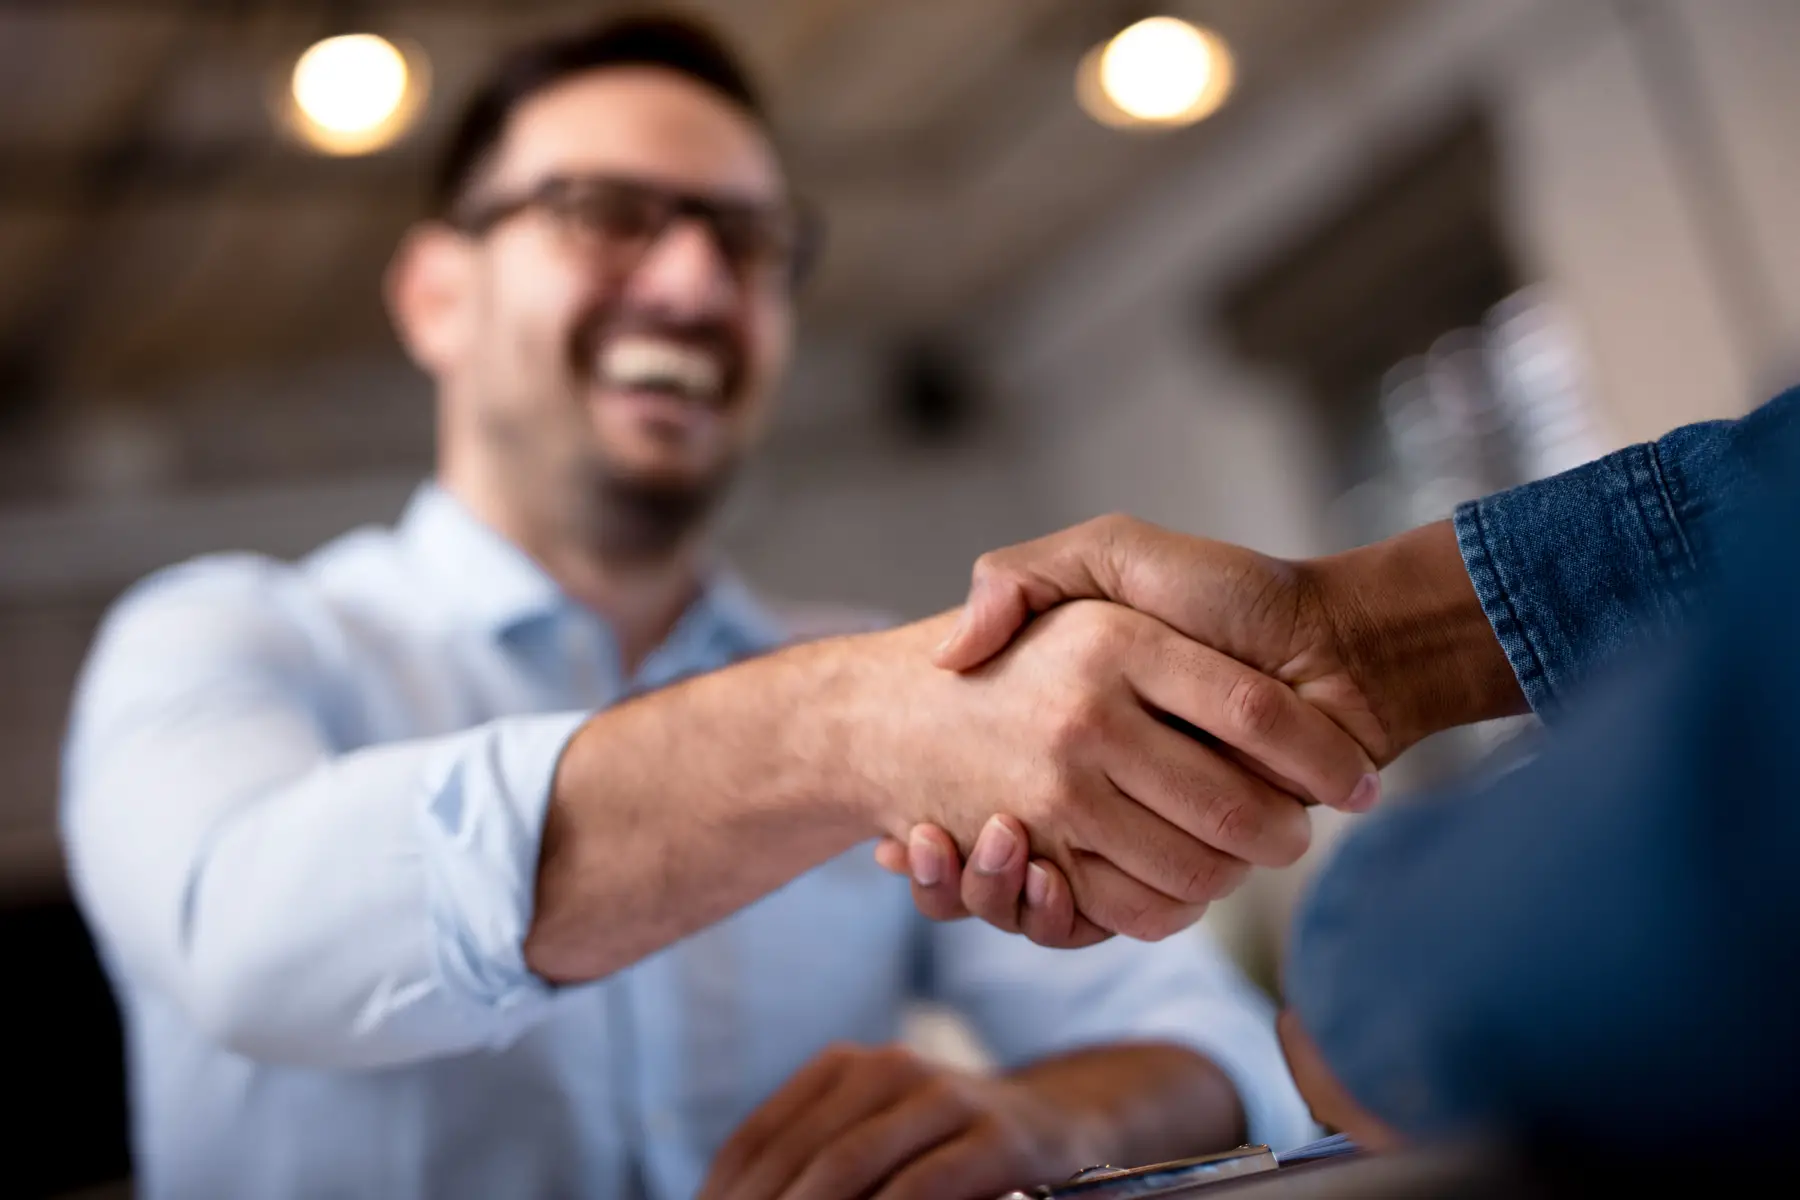 Candidate offering a handshake at a job interview